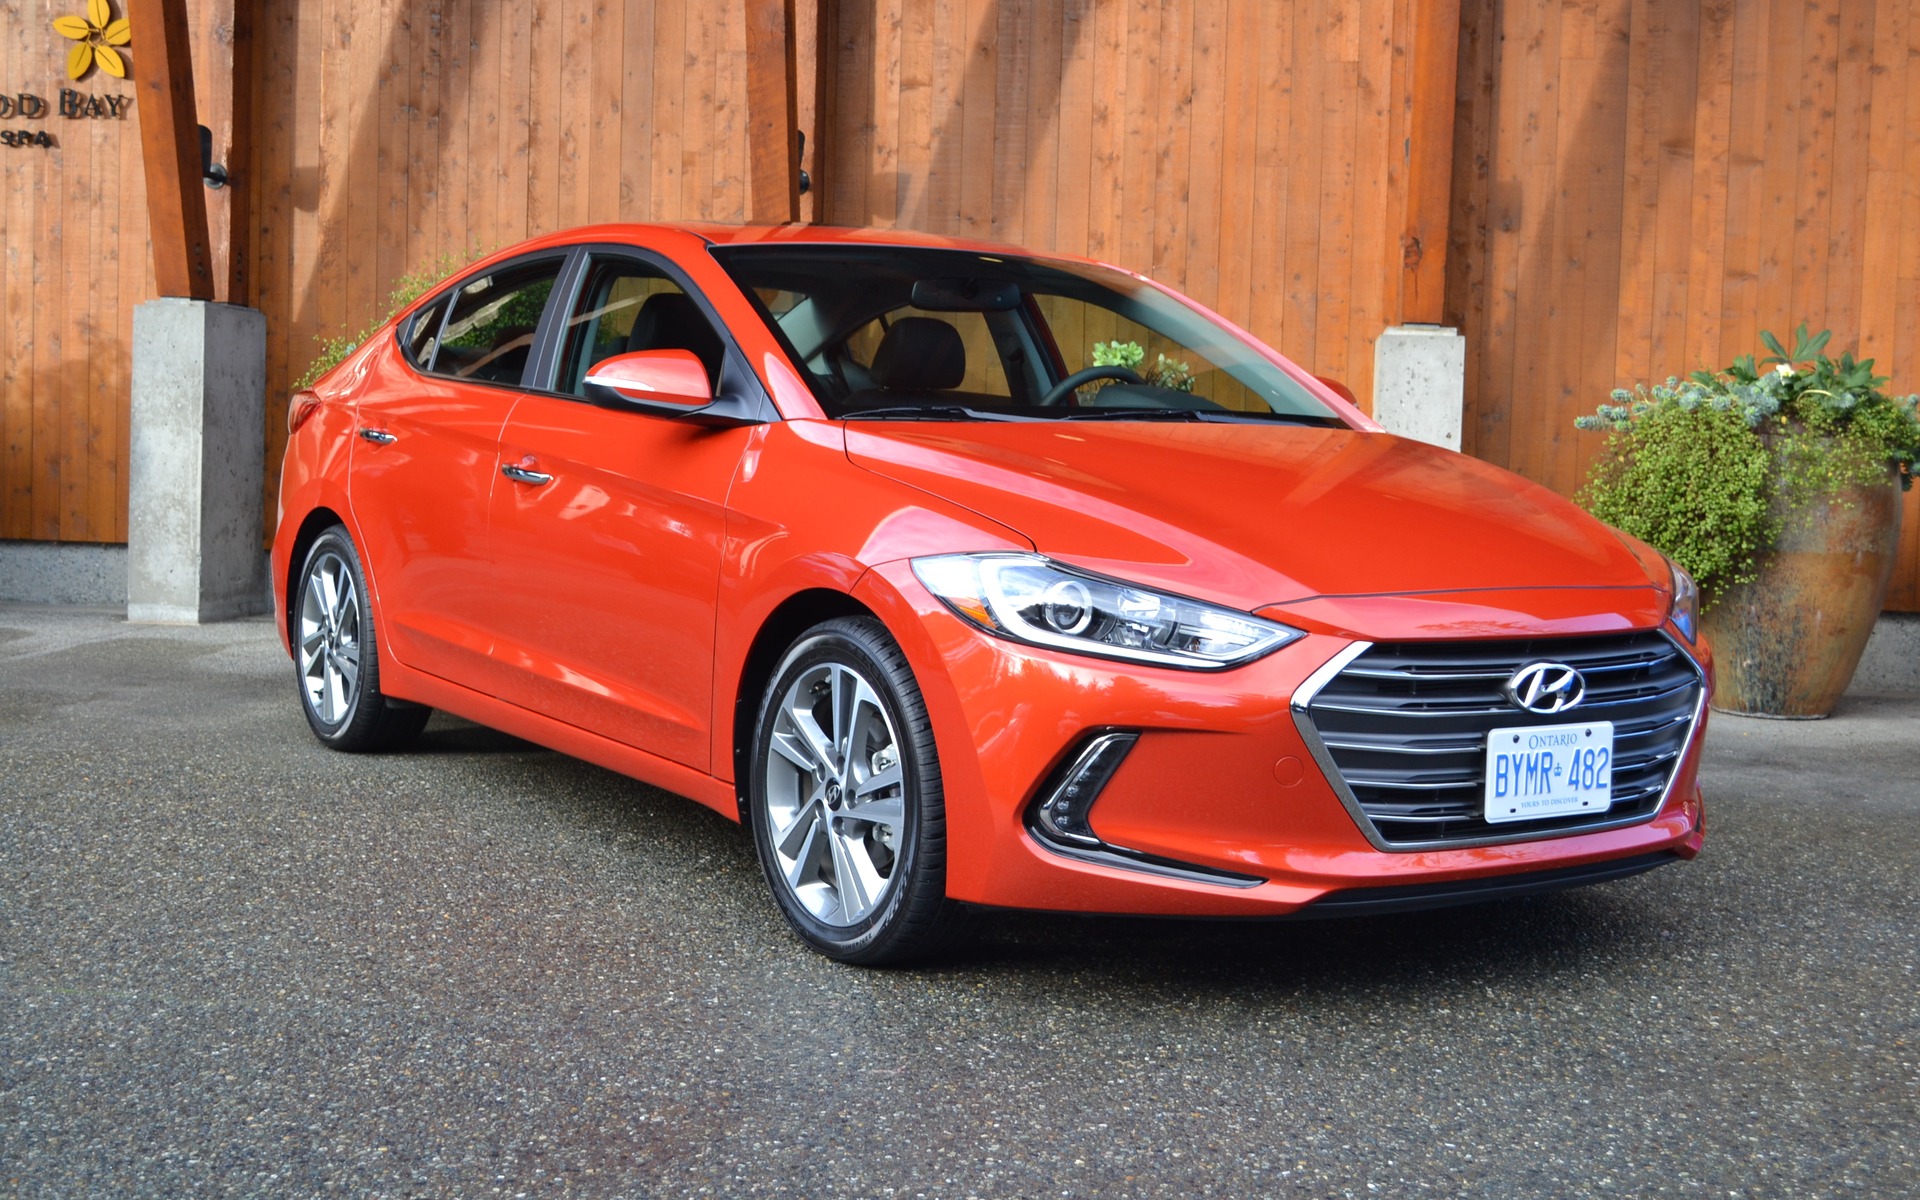 2016 Hyundai Elantra India Price Mileage Specifications Review Images